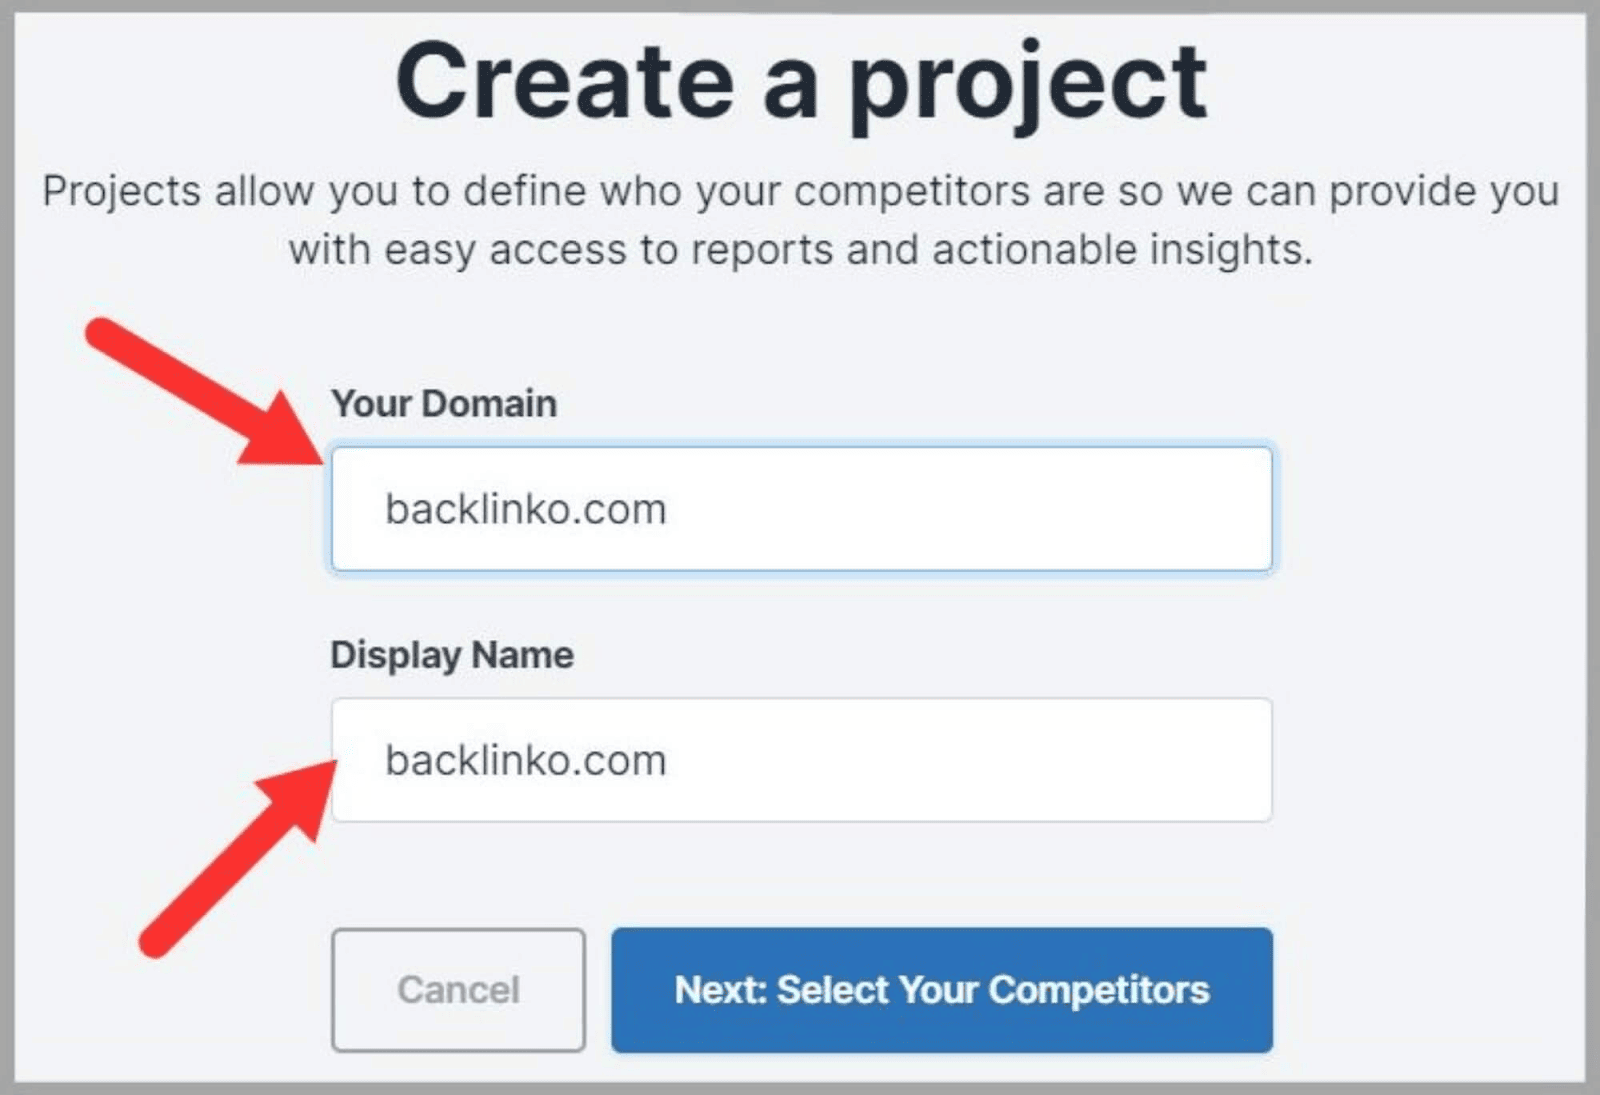 Enter your domain and display name